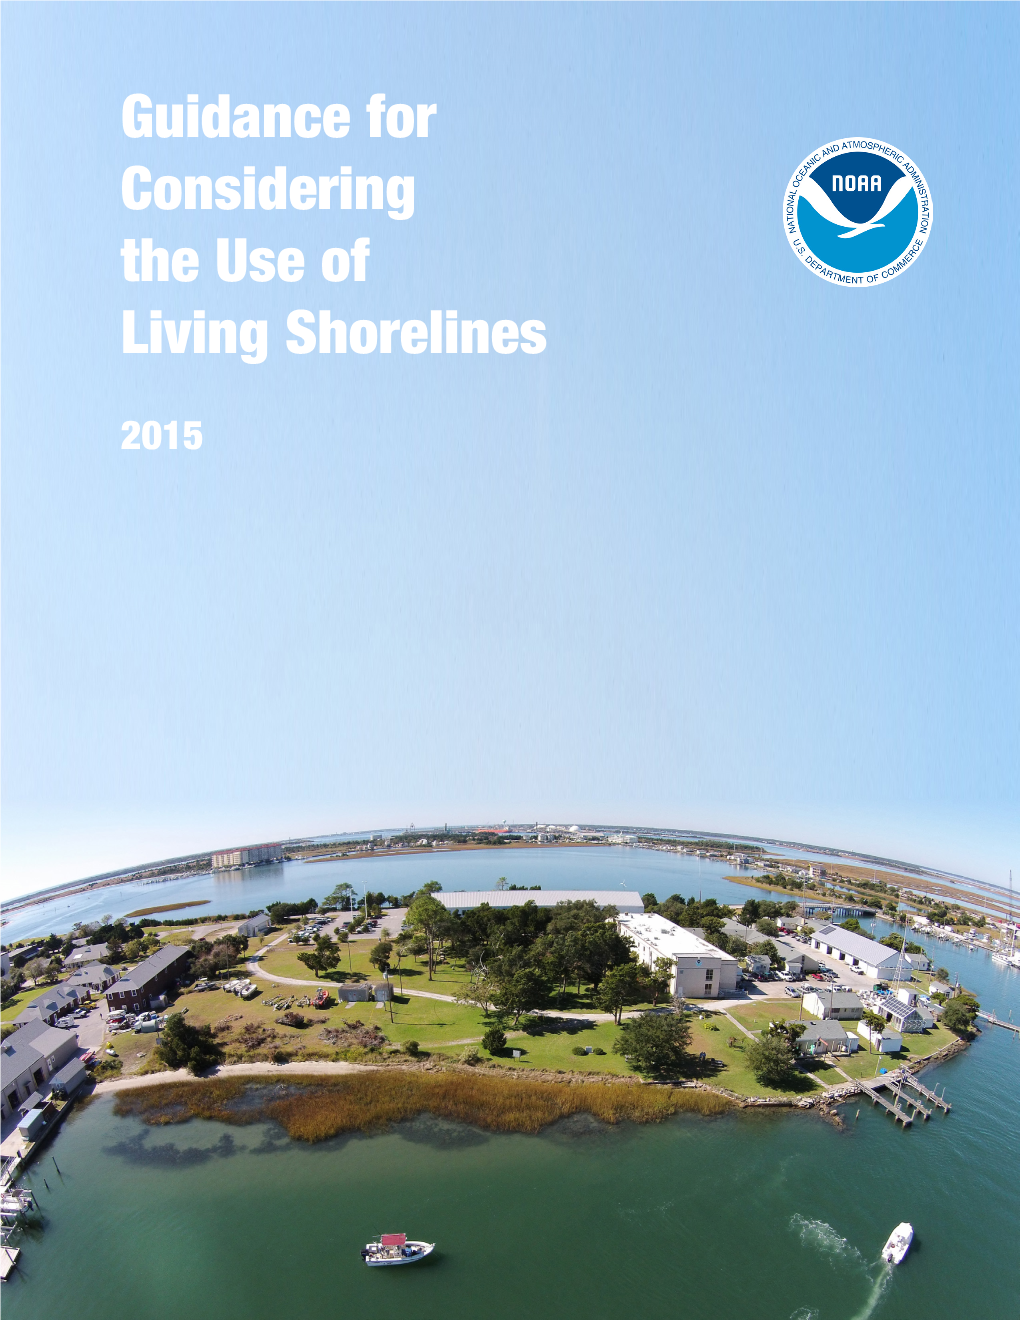 NOAA Guidance for Considering the Use of Living Shorelines